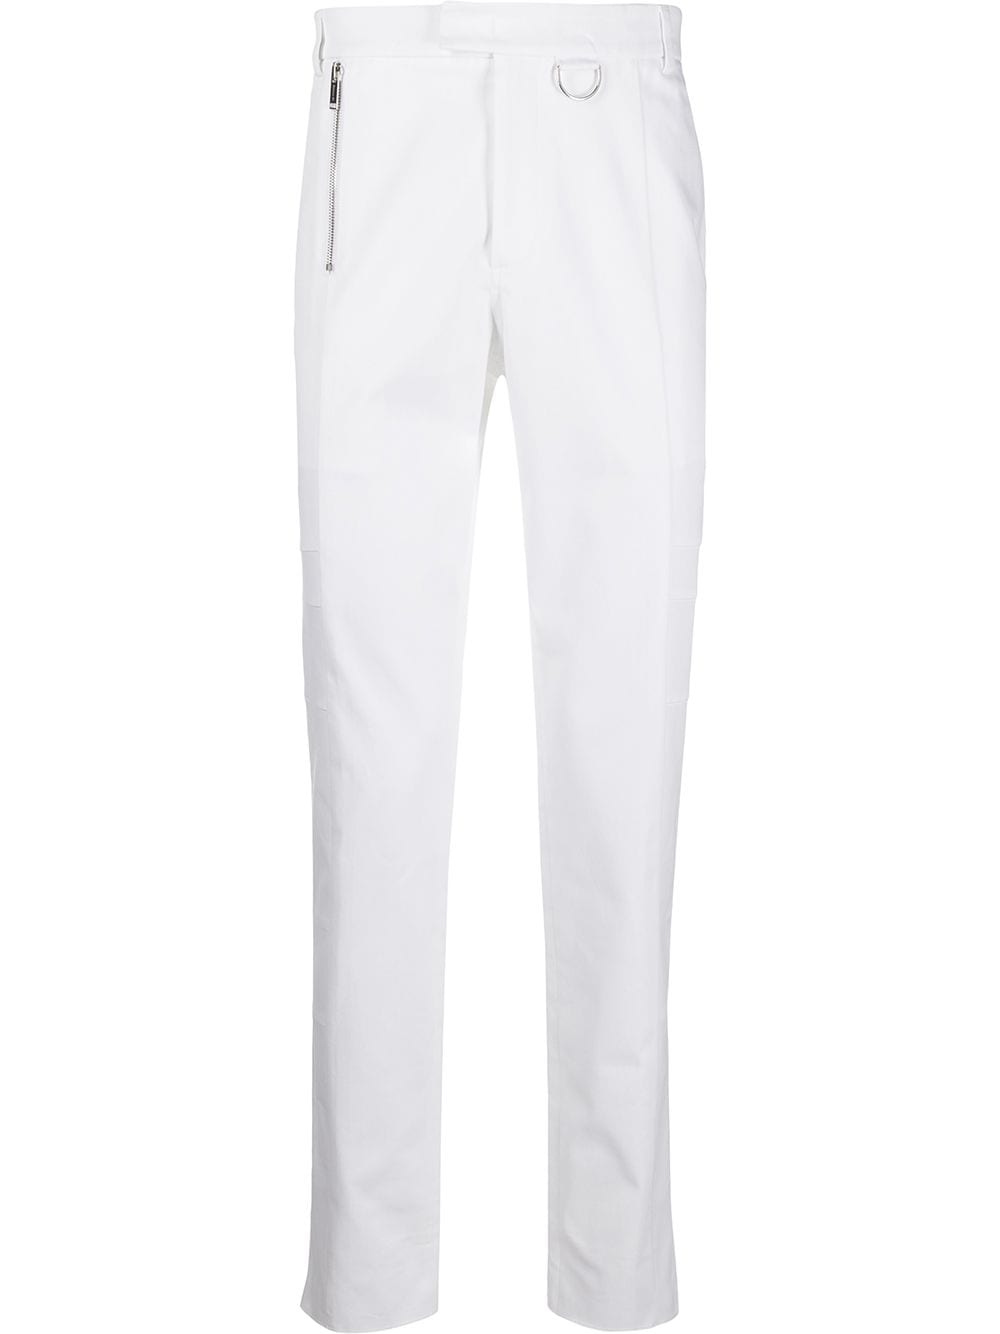 Les Hommes Embellished Slim-fit Chinos In White